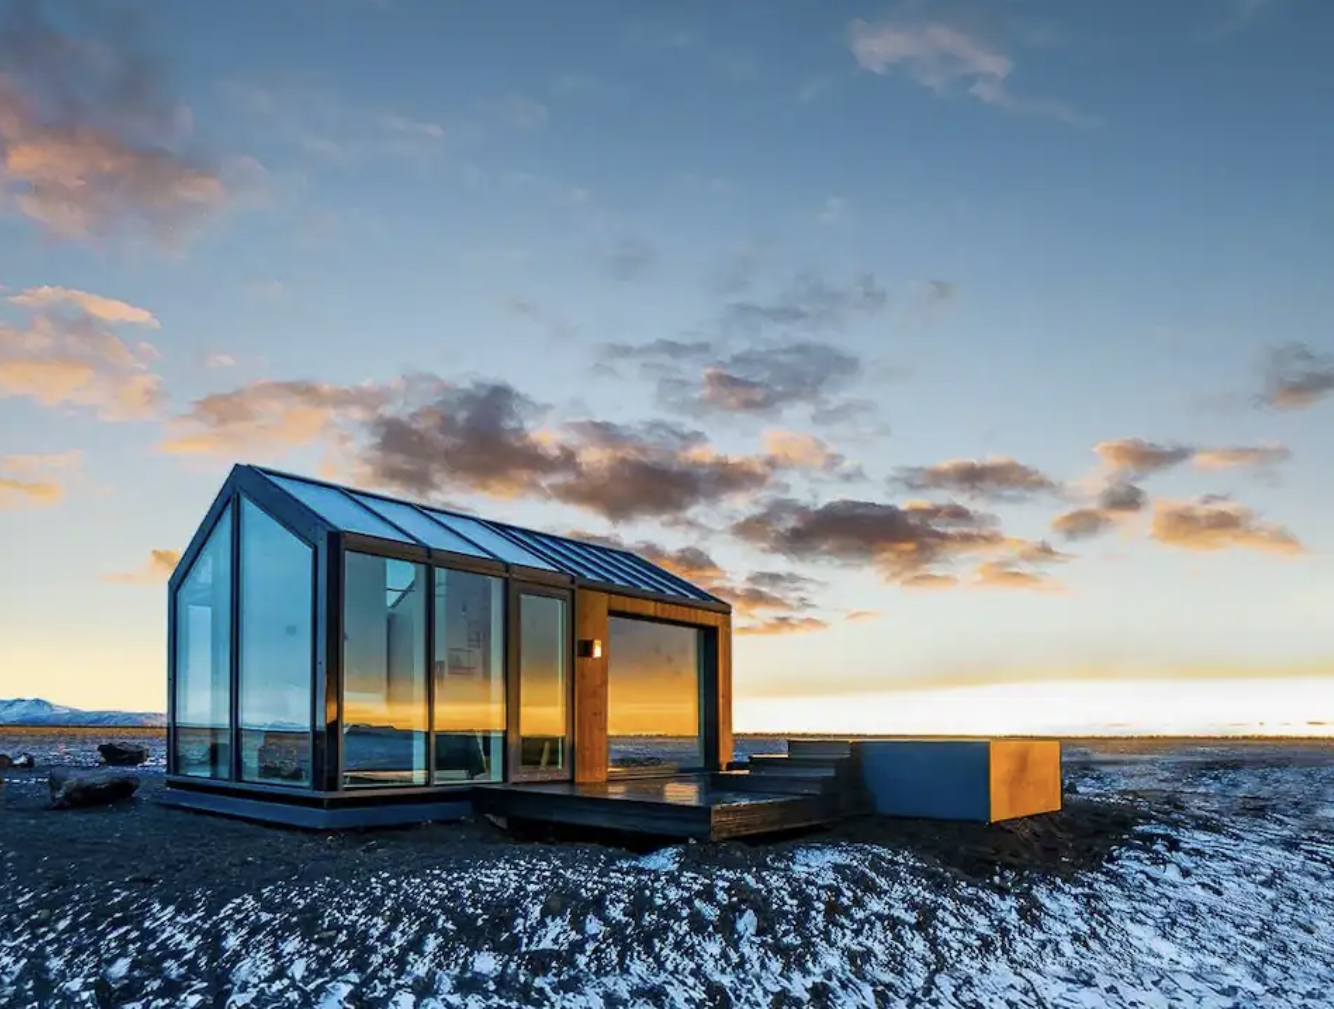 This cottage in Iceland may be the perfect getaway for couples checking Airbnb.
pictured: the glass cottage in Iceland 